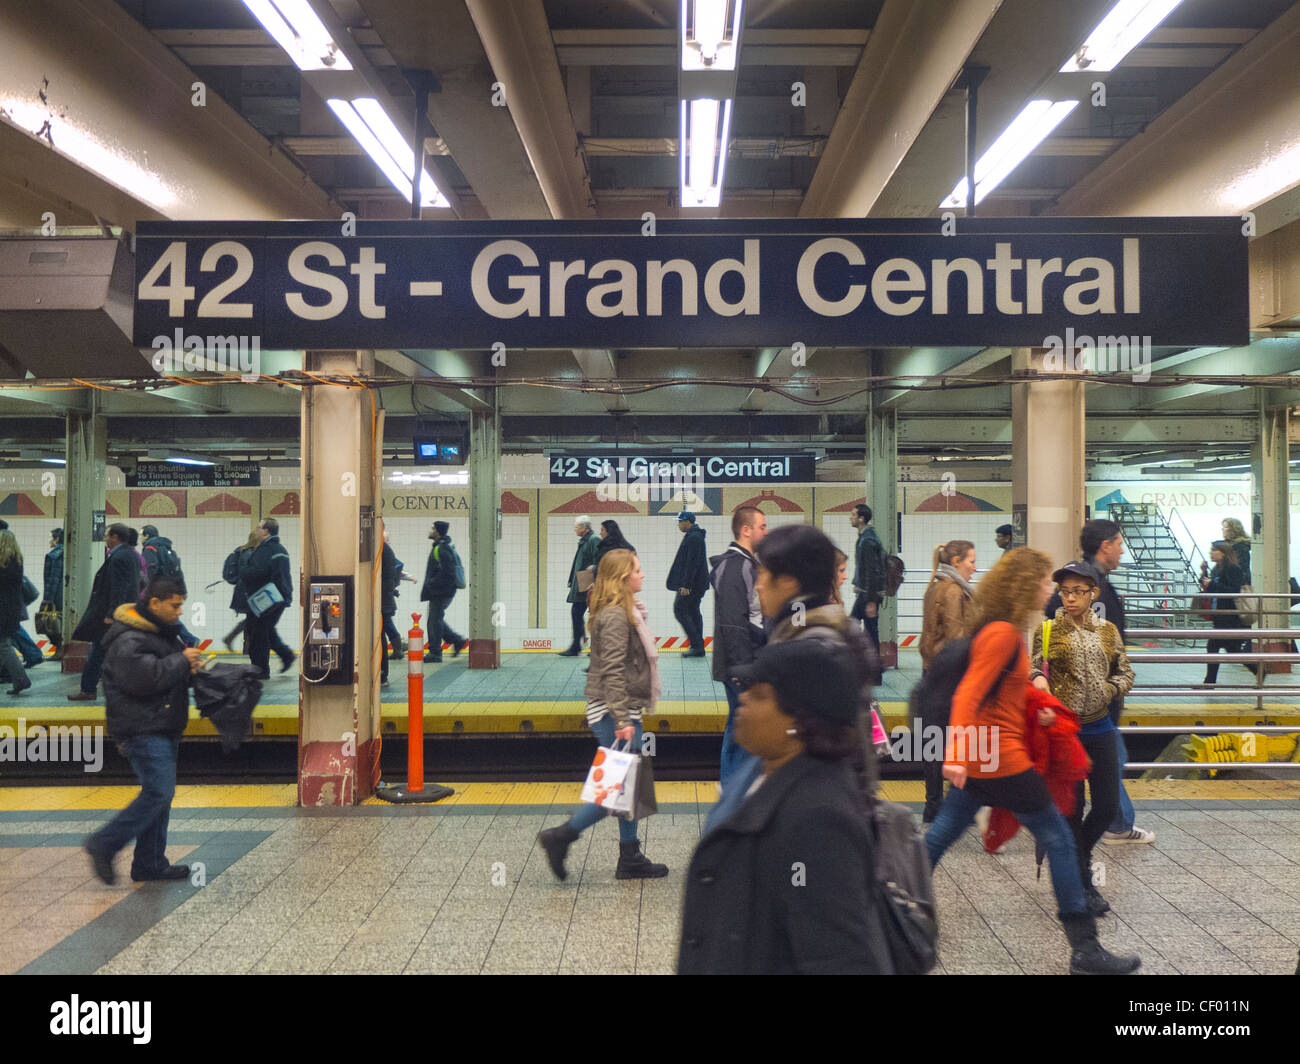 Grand central subway station in NYC Stock Photo